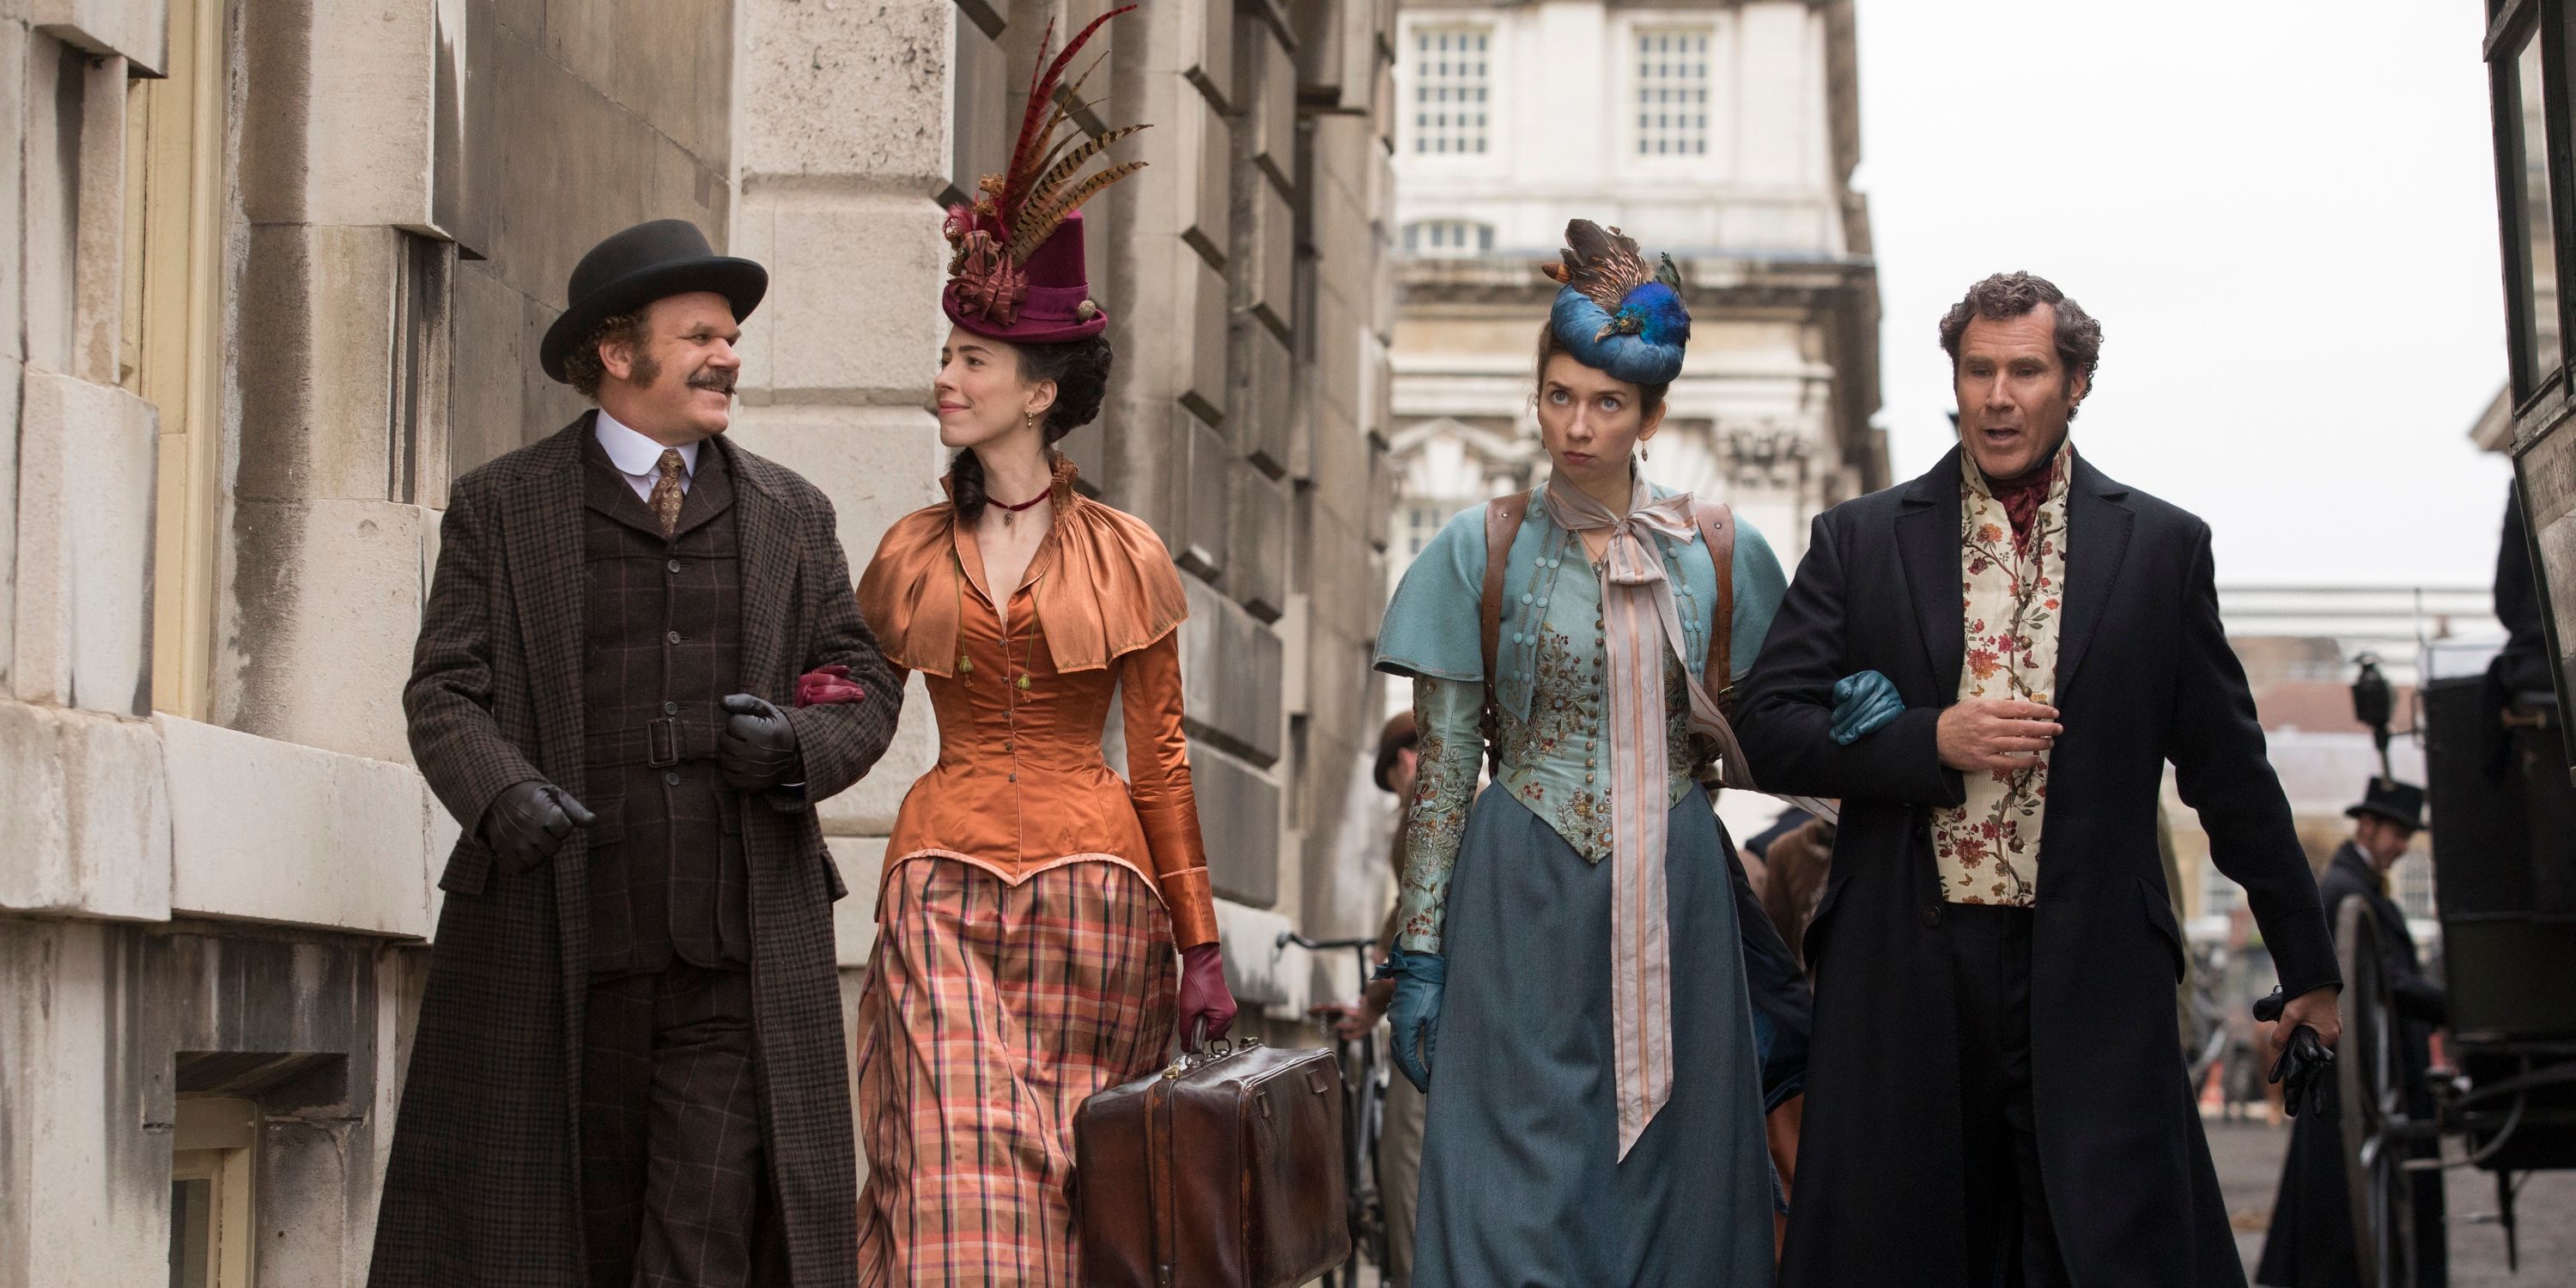 John C. Reilly, Rebecca Hall, Lauren Lapkus, and Will Ferrell in Holmes and Watson